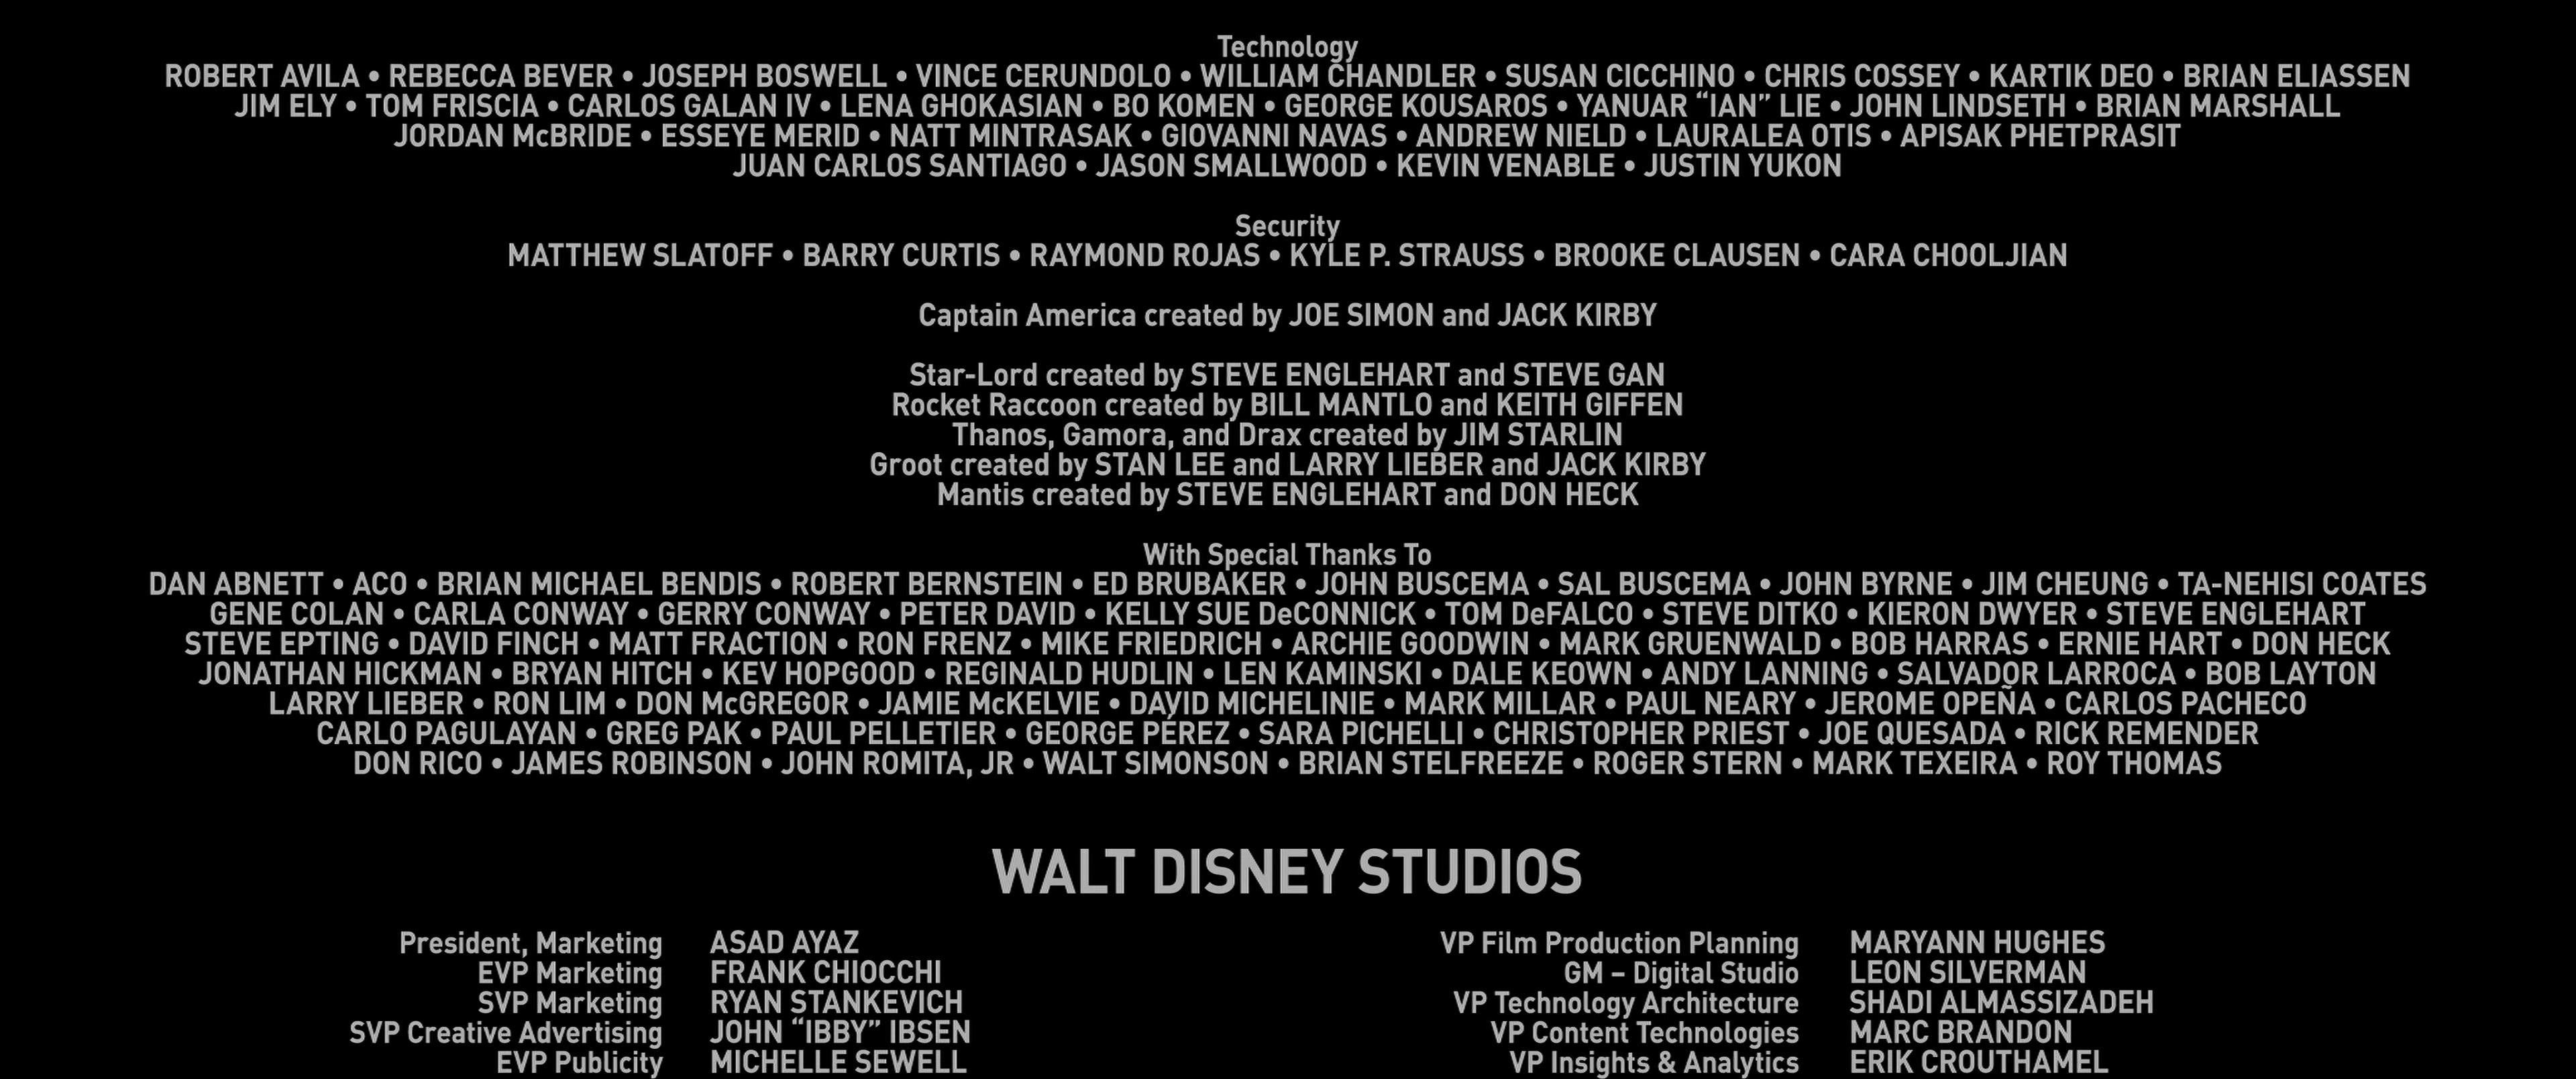 Jim Starlin, as well as other Marvel creators, are credited in Avengers: Endgame (2019), Marvel Entertainment